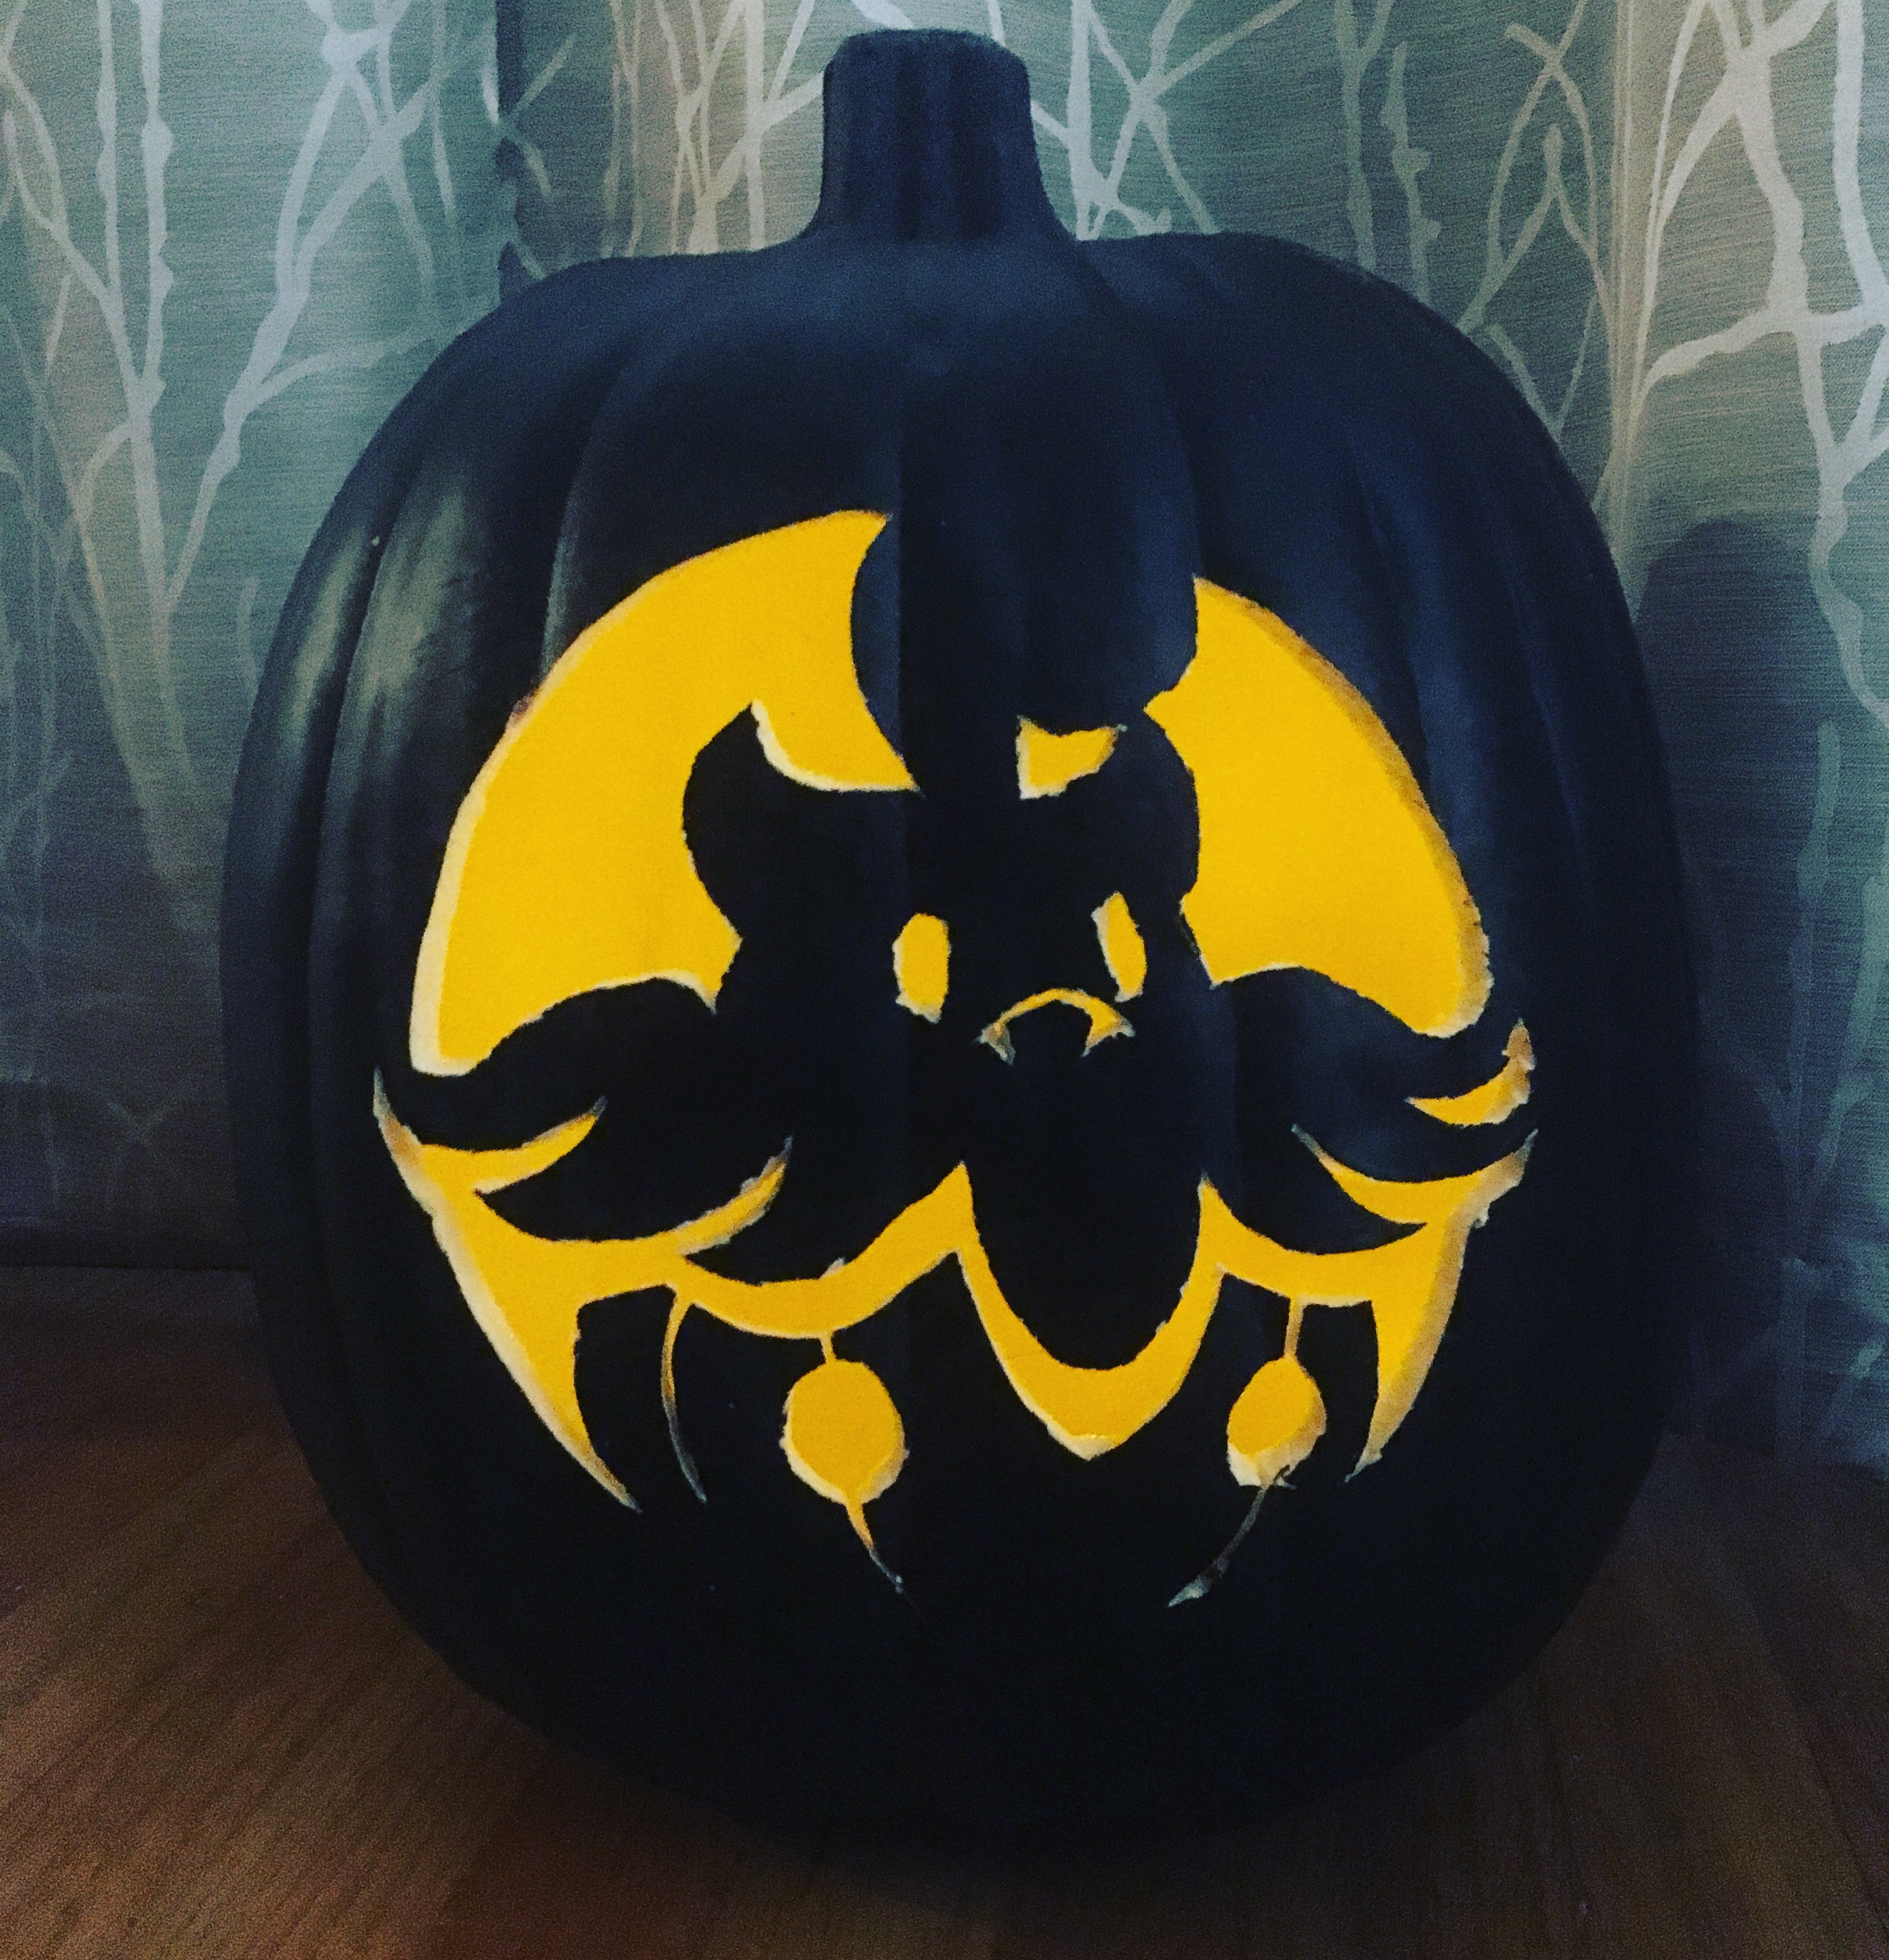 Black foam pumpkin carved with an image of the Pokemon Pumpkaboo and lit from within.